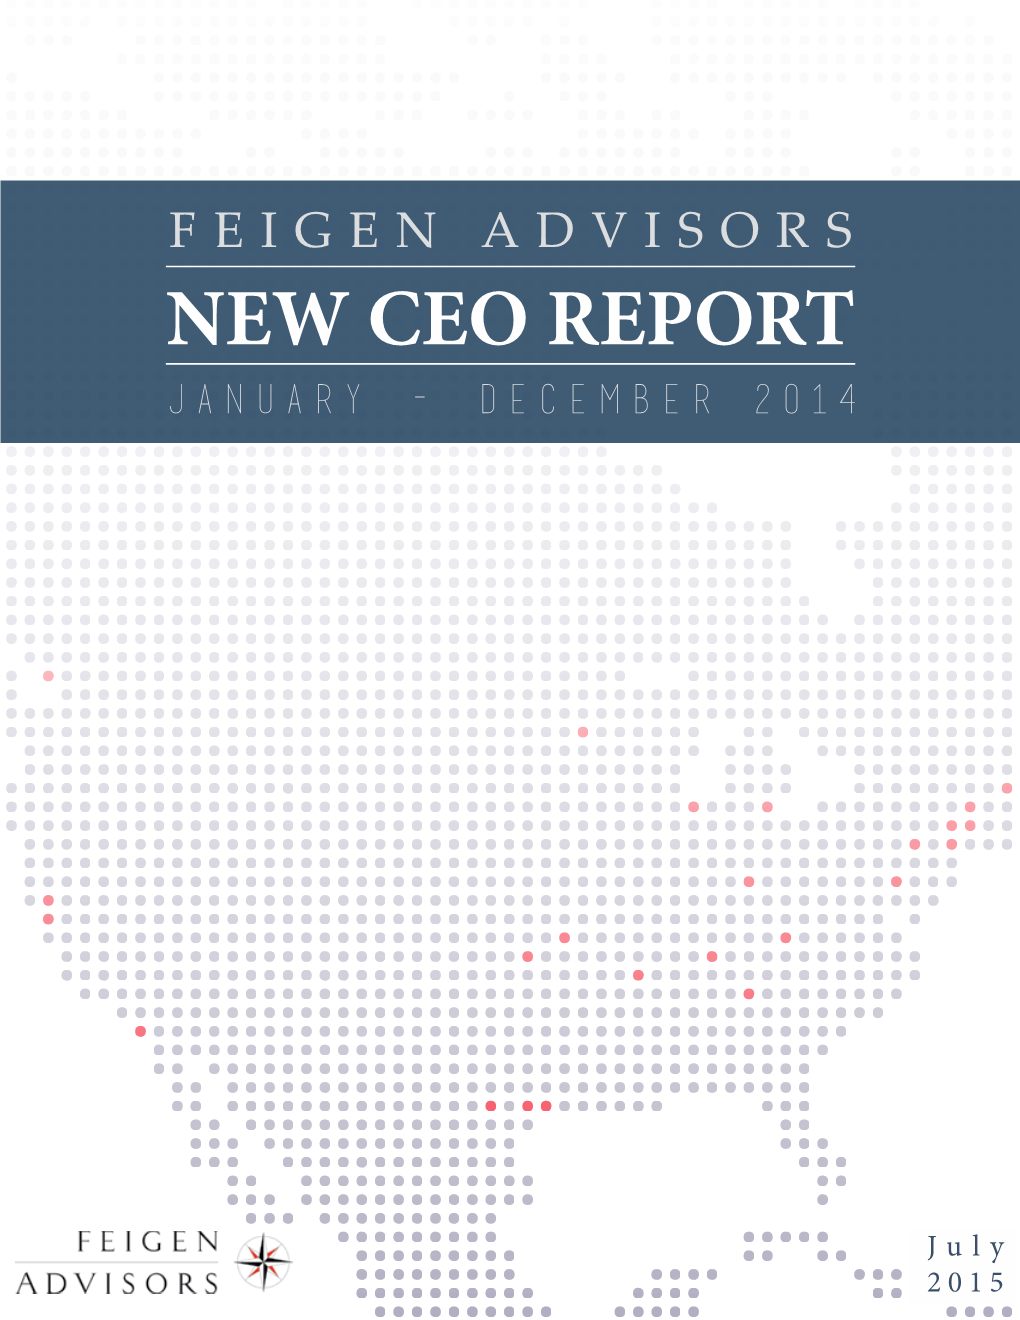 2014 New CEO Report